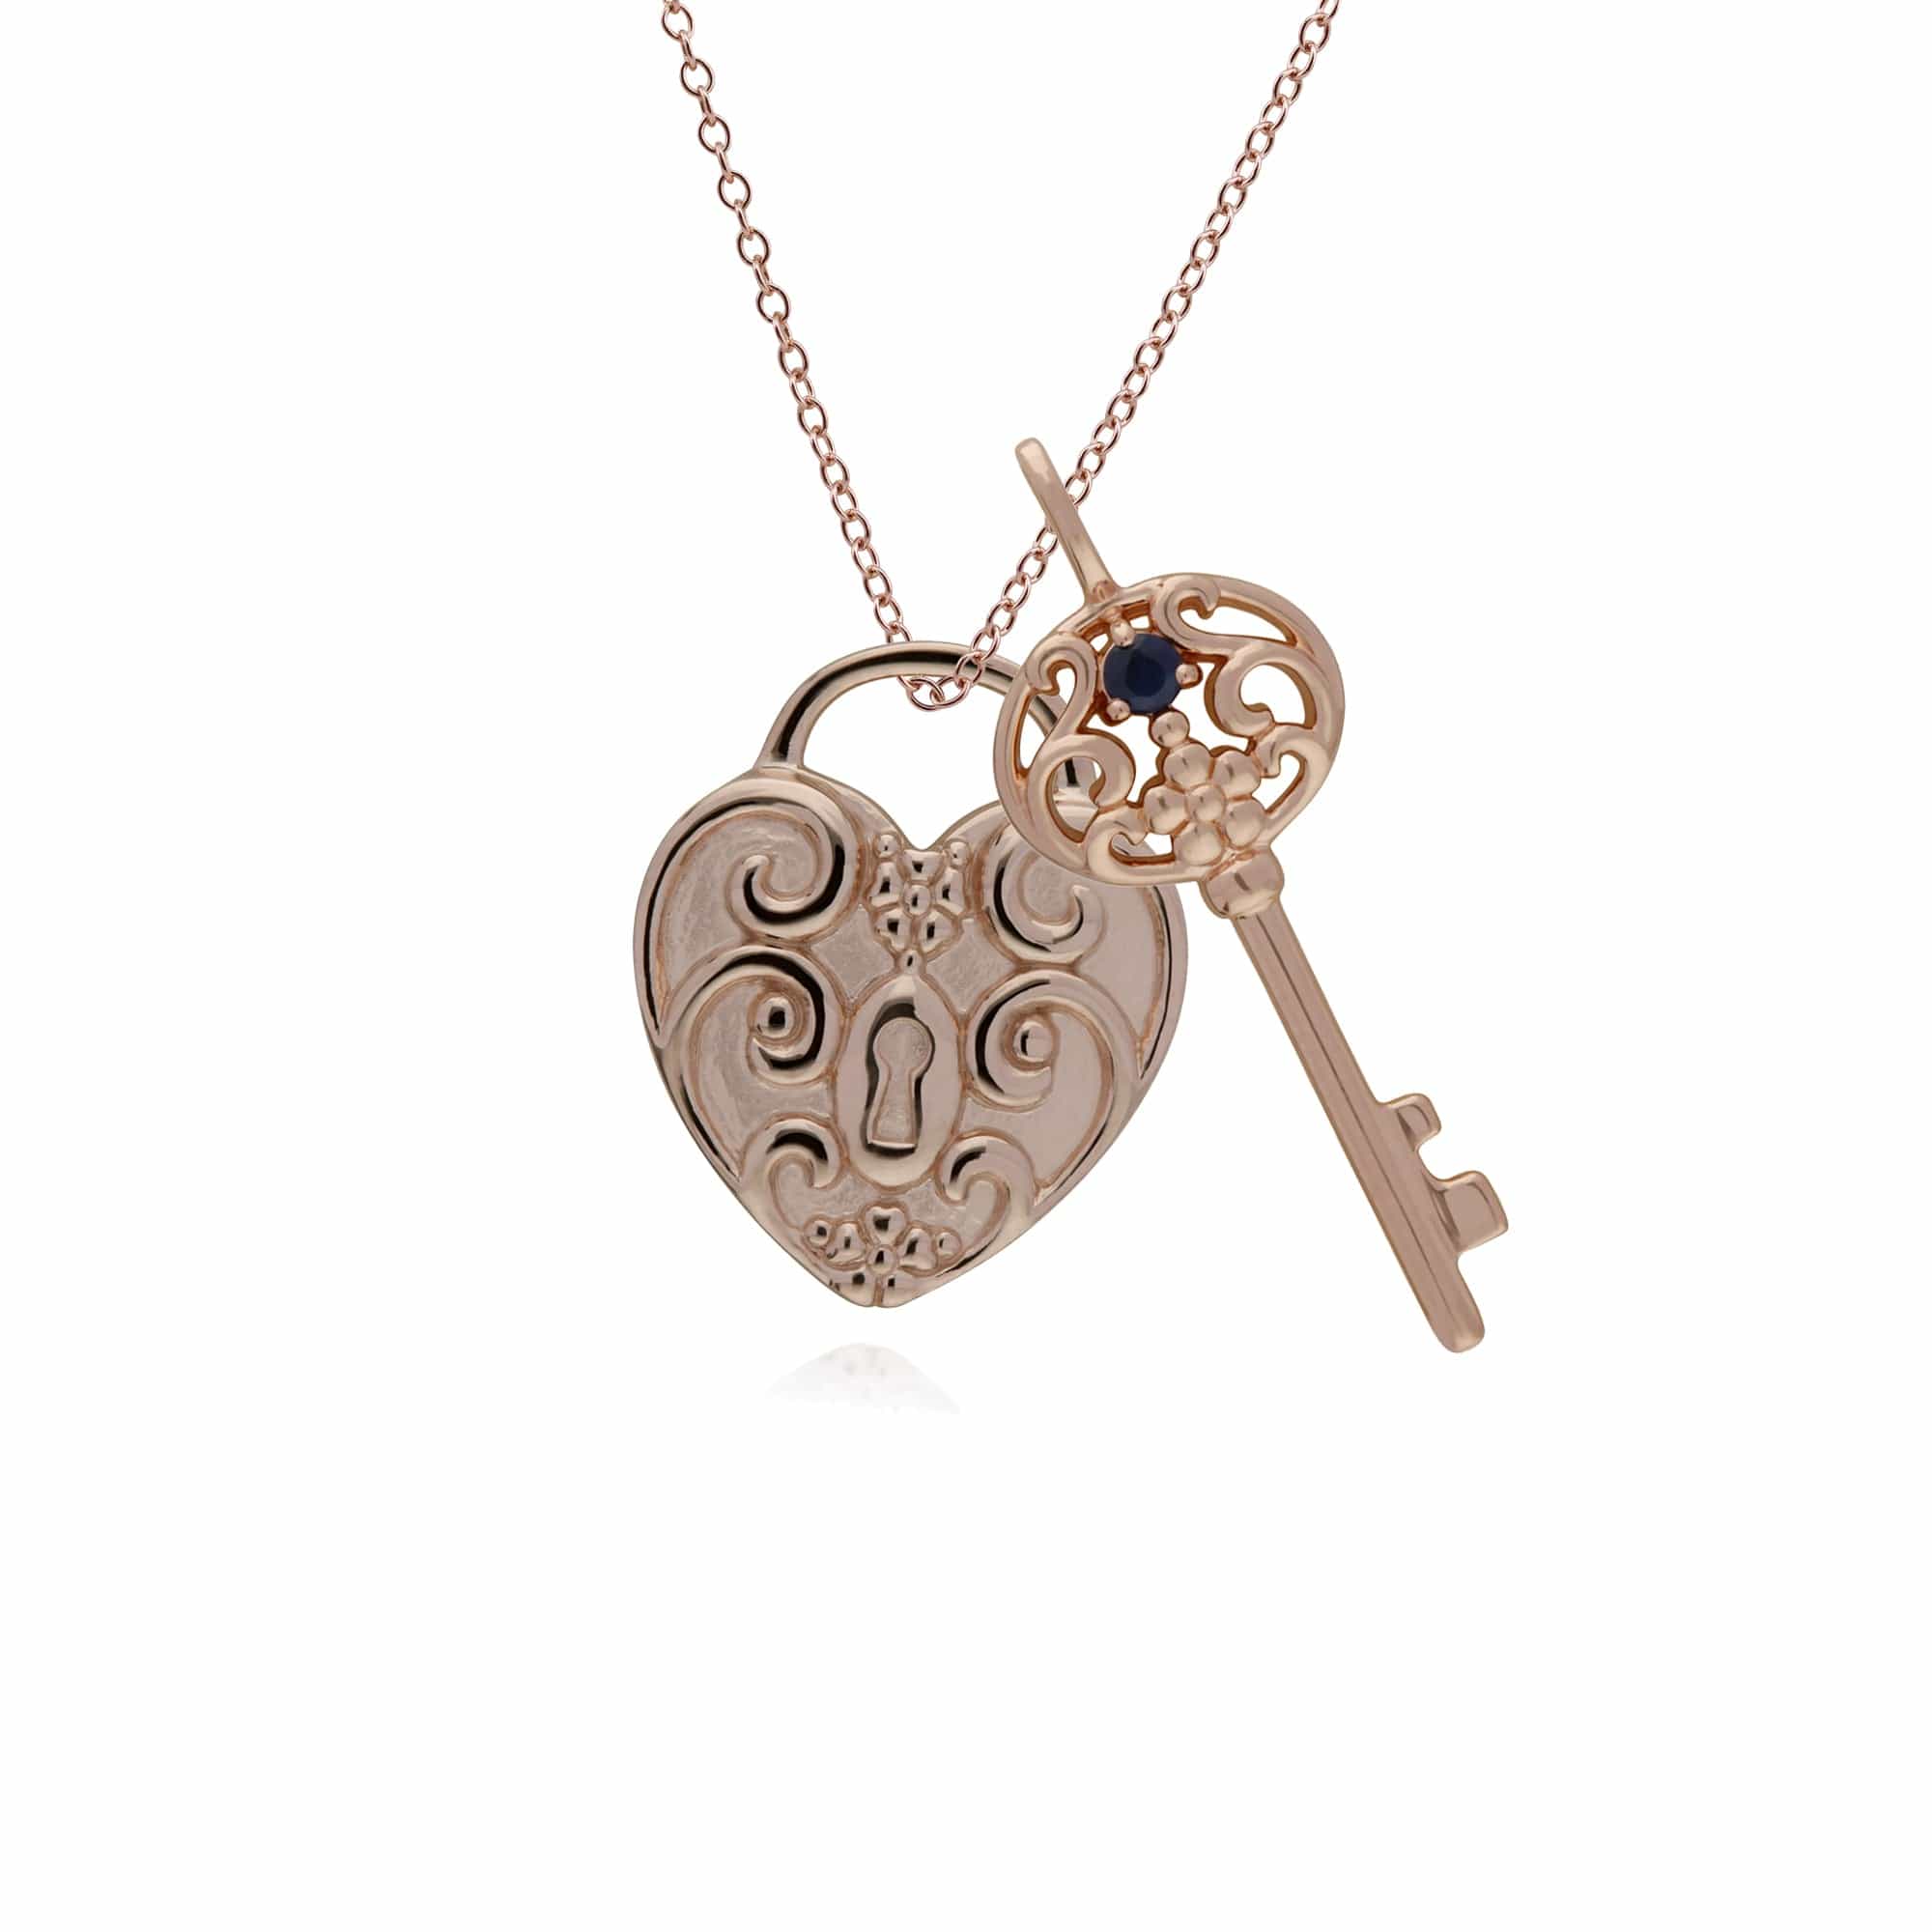 270P026701925-270P026501925 Classic Swirl Heart Lock Pendant & Sapphire Big Key Charm in Rose Gold Plated 925 Sterling Silver 1